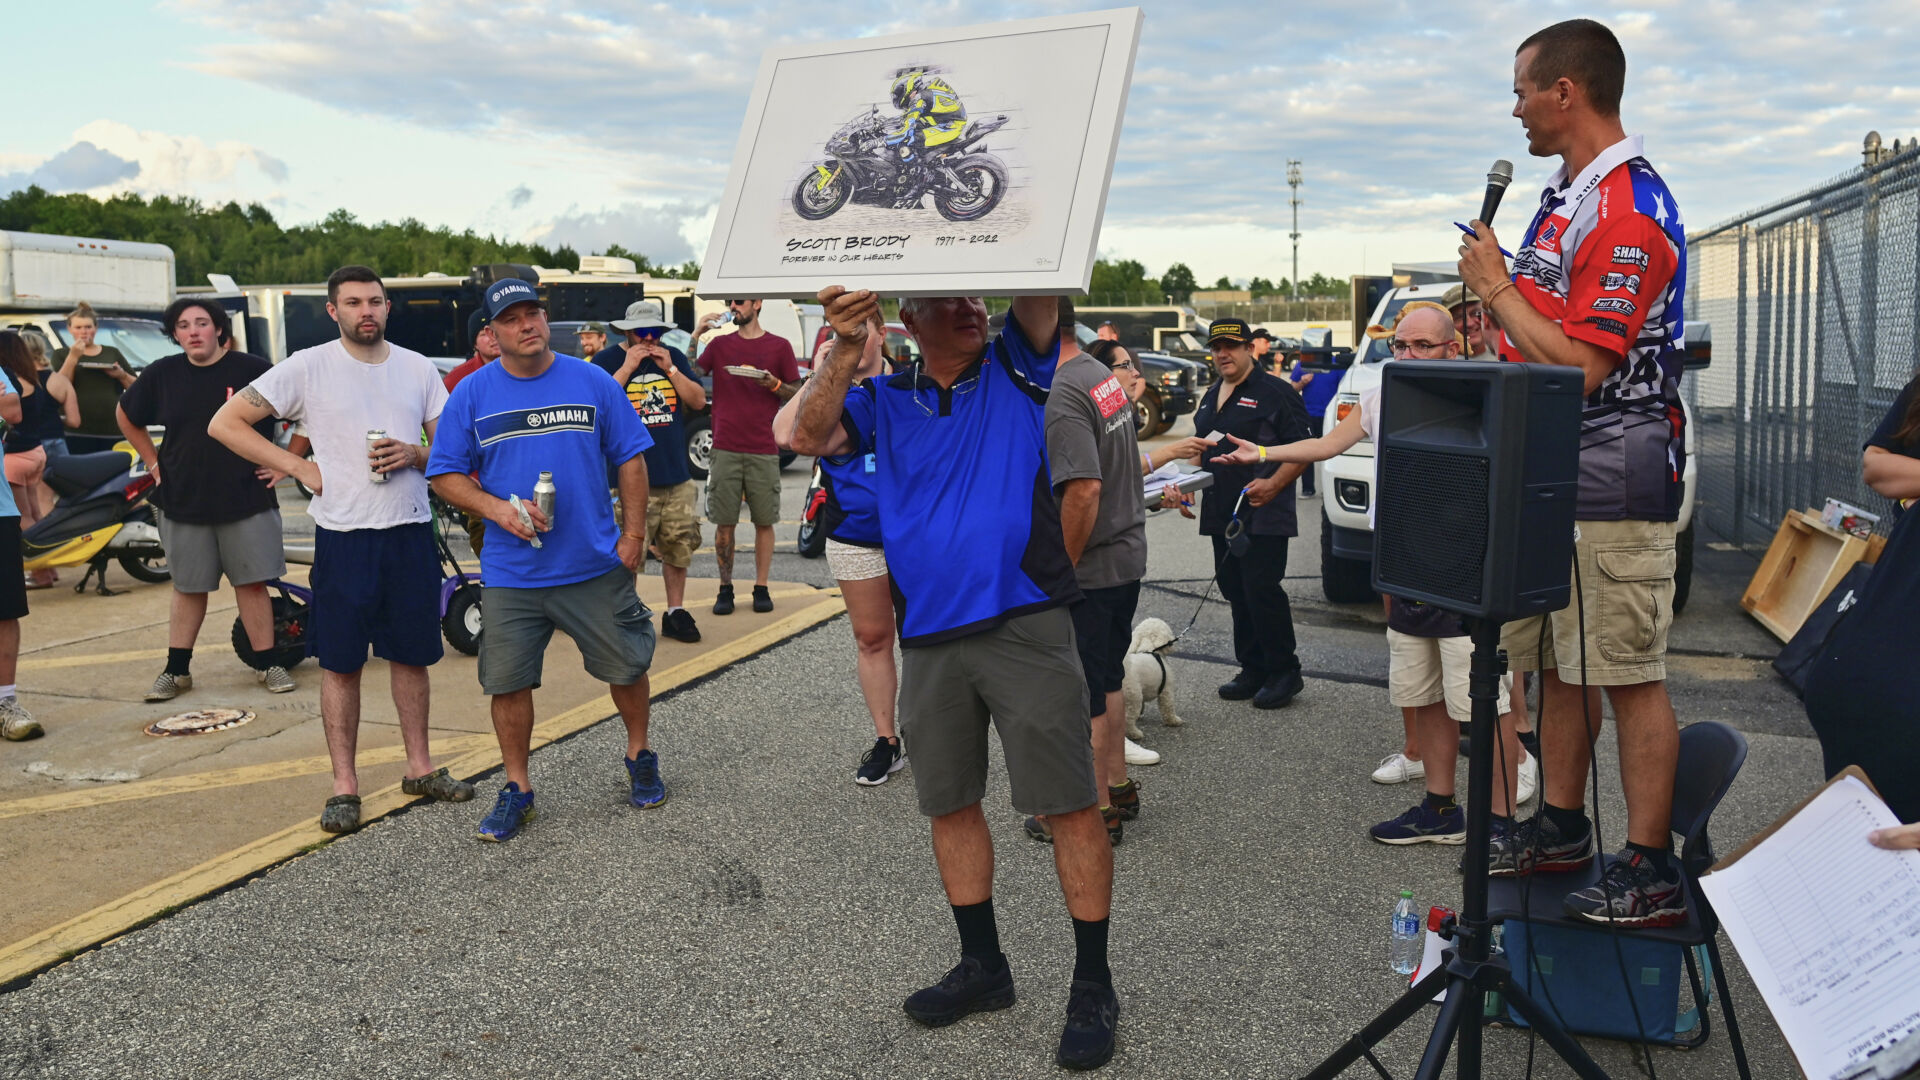 NEMRR's Eric Wood (right, with microphone) and John Grush (holding art work) at the auction to honor Scott Briody and benefit the Roadracing World Action Fund. Photo courtesy NEMRR.